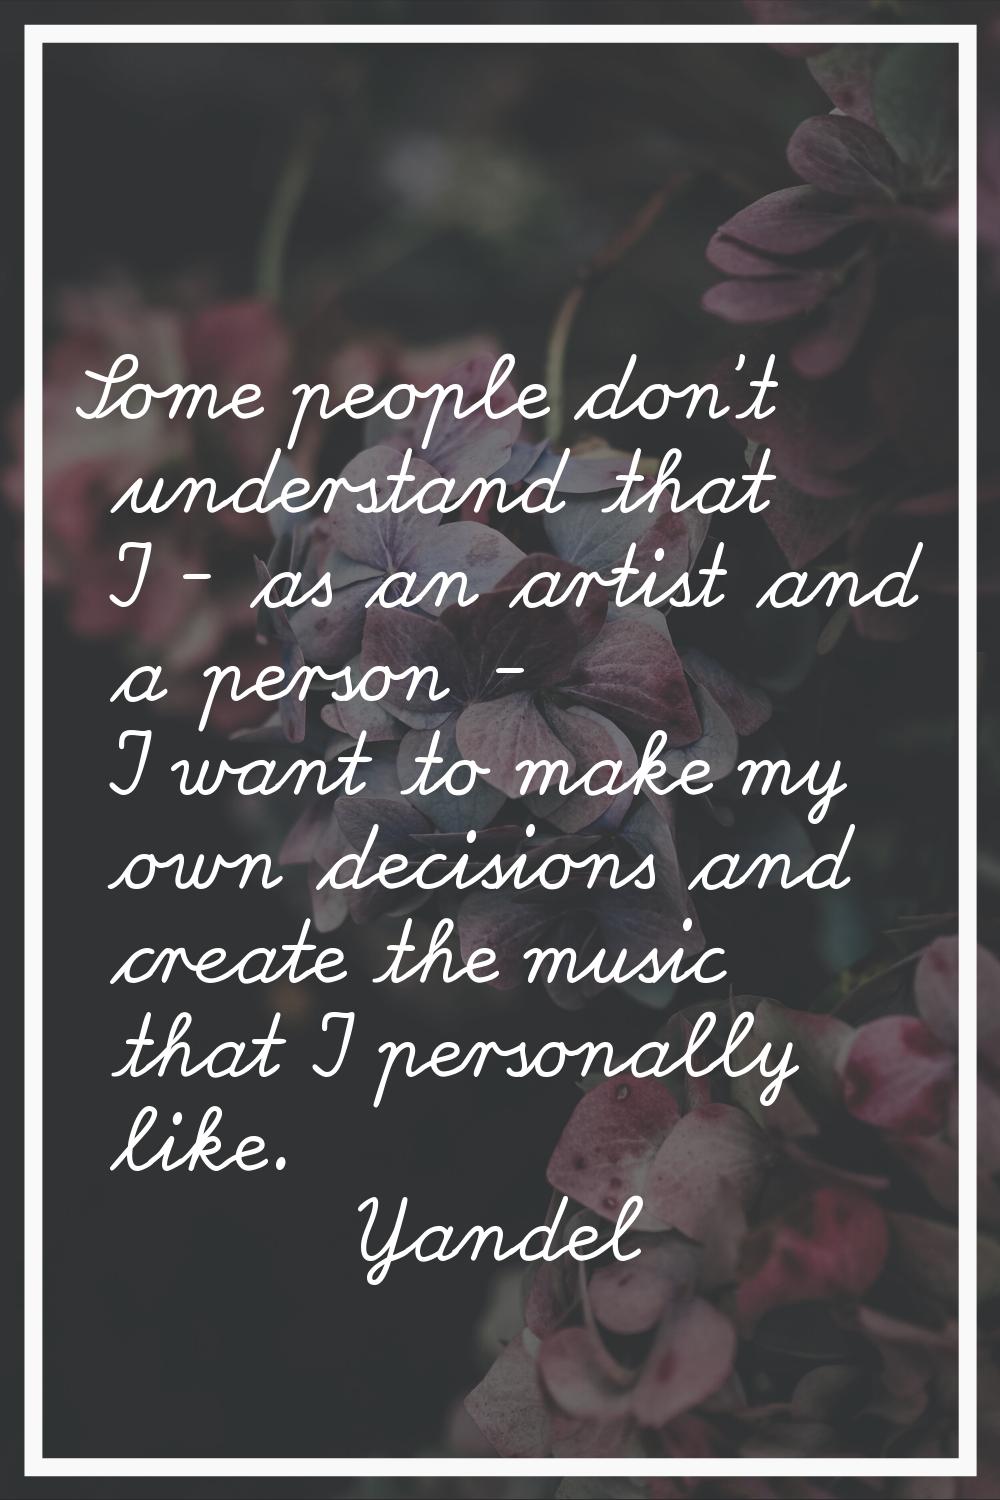 Some people don't understand that I - as an artist and a person - I want to make my own decisions a